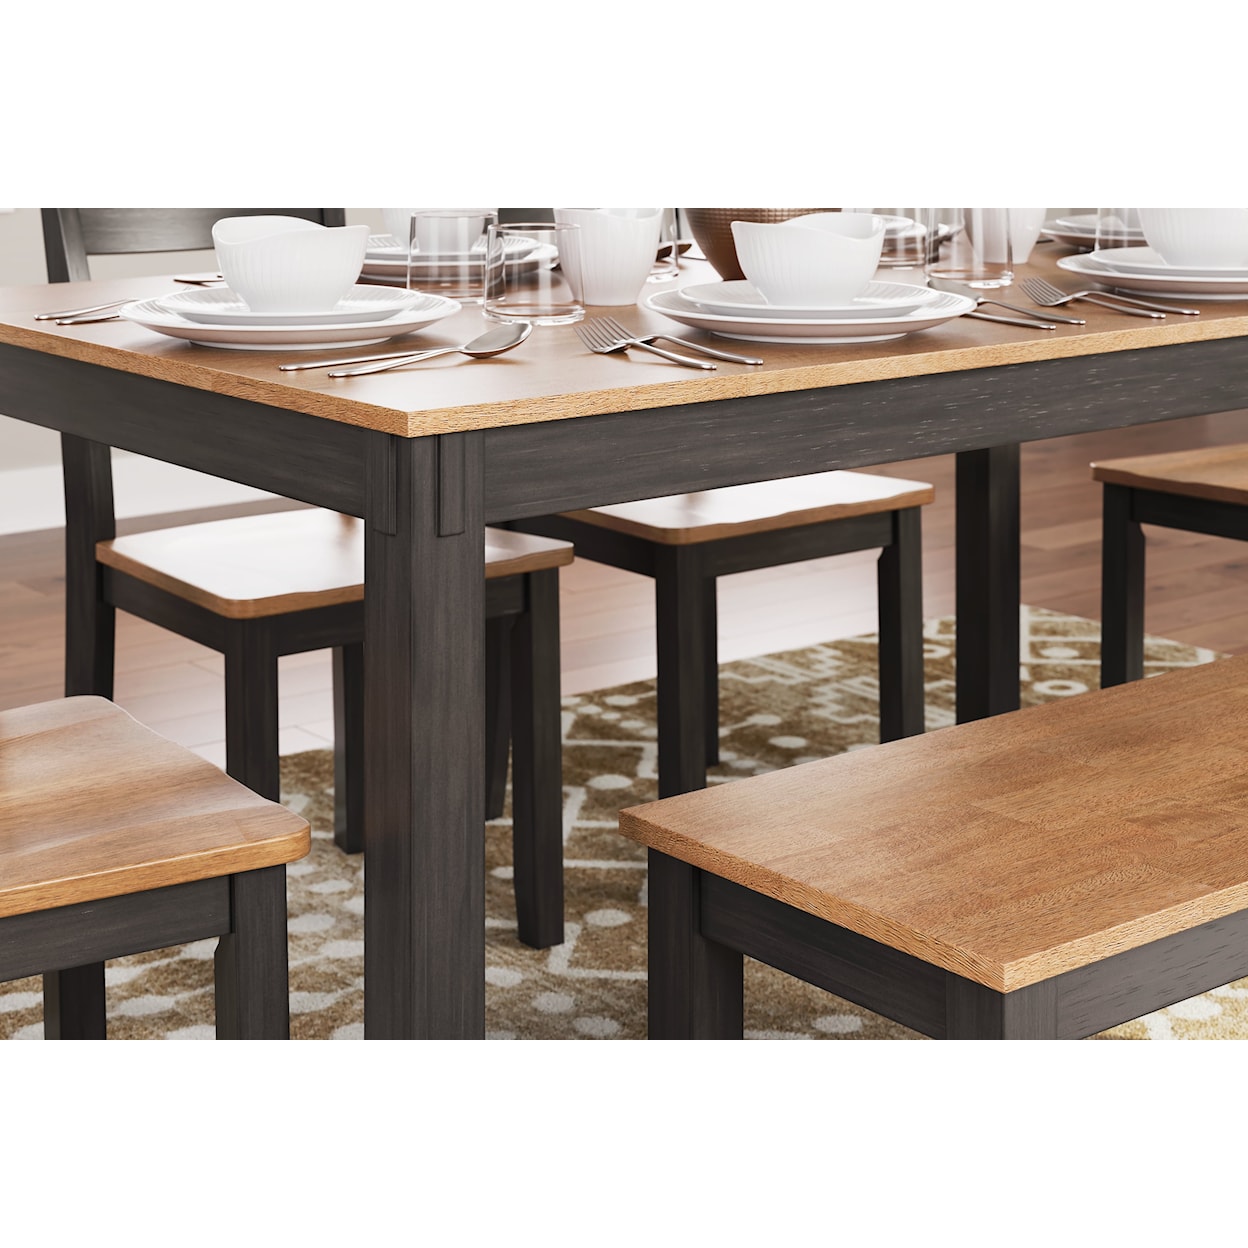 Signature Design by Ashley Gesthaven Dining Room Table Set (6/Cn)